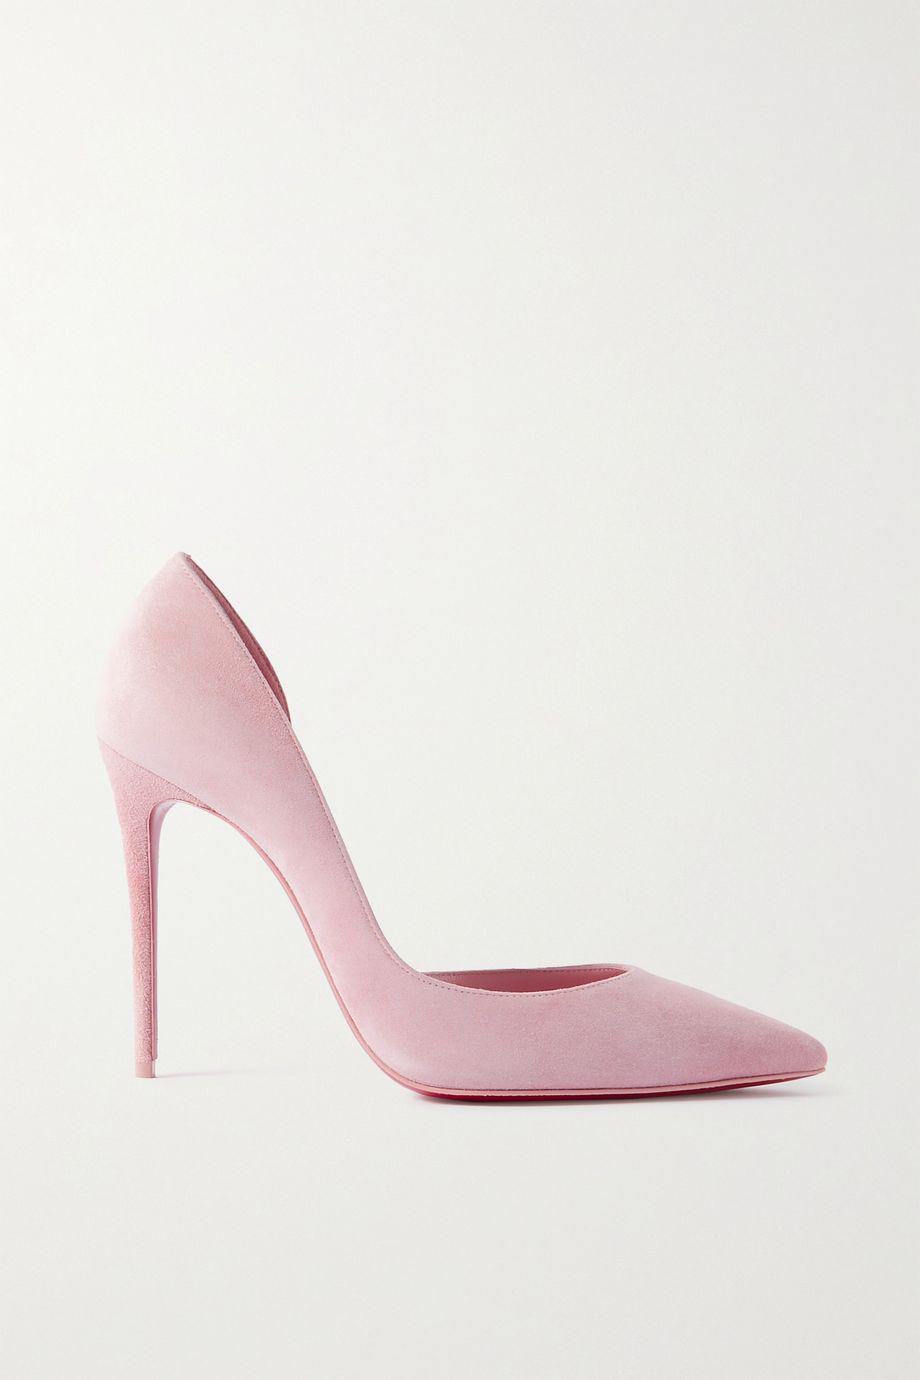 Iriza 100 suede point-toe pumps by CHRISTIAN LOUBOUTIN